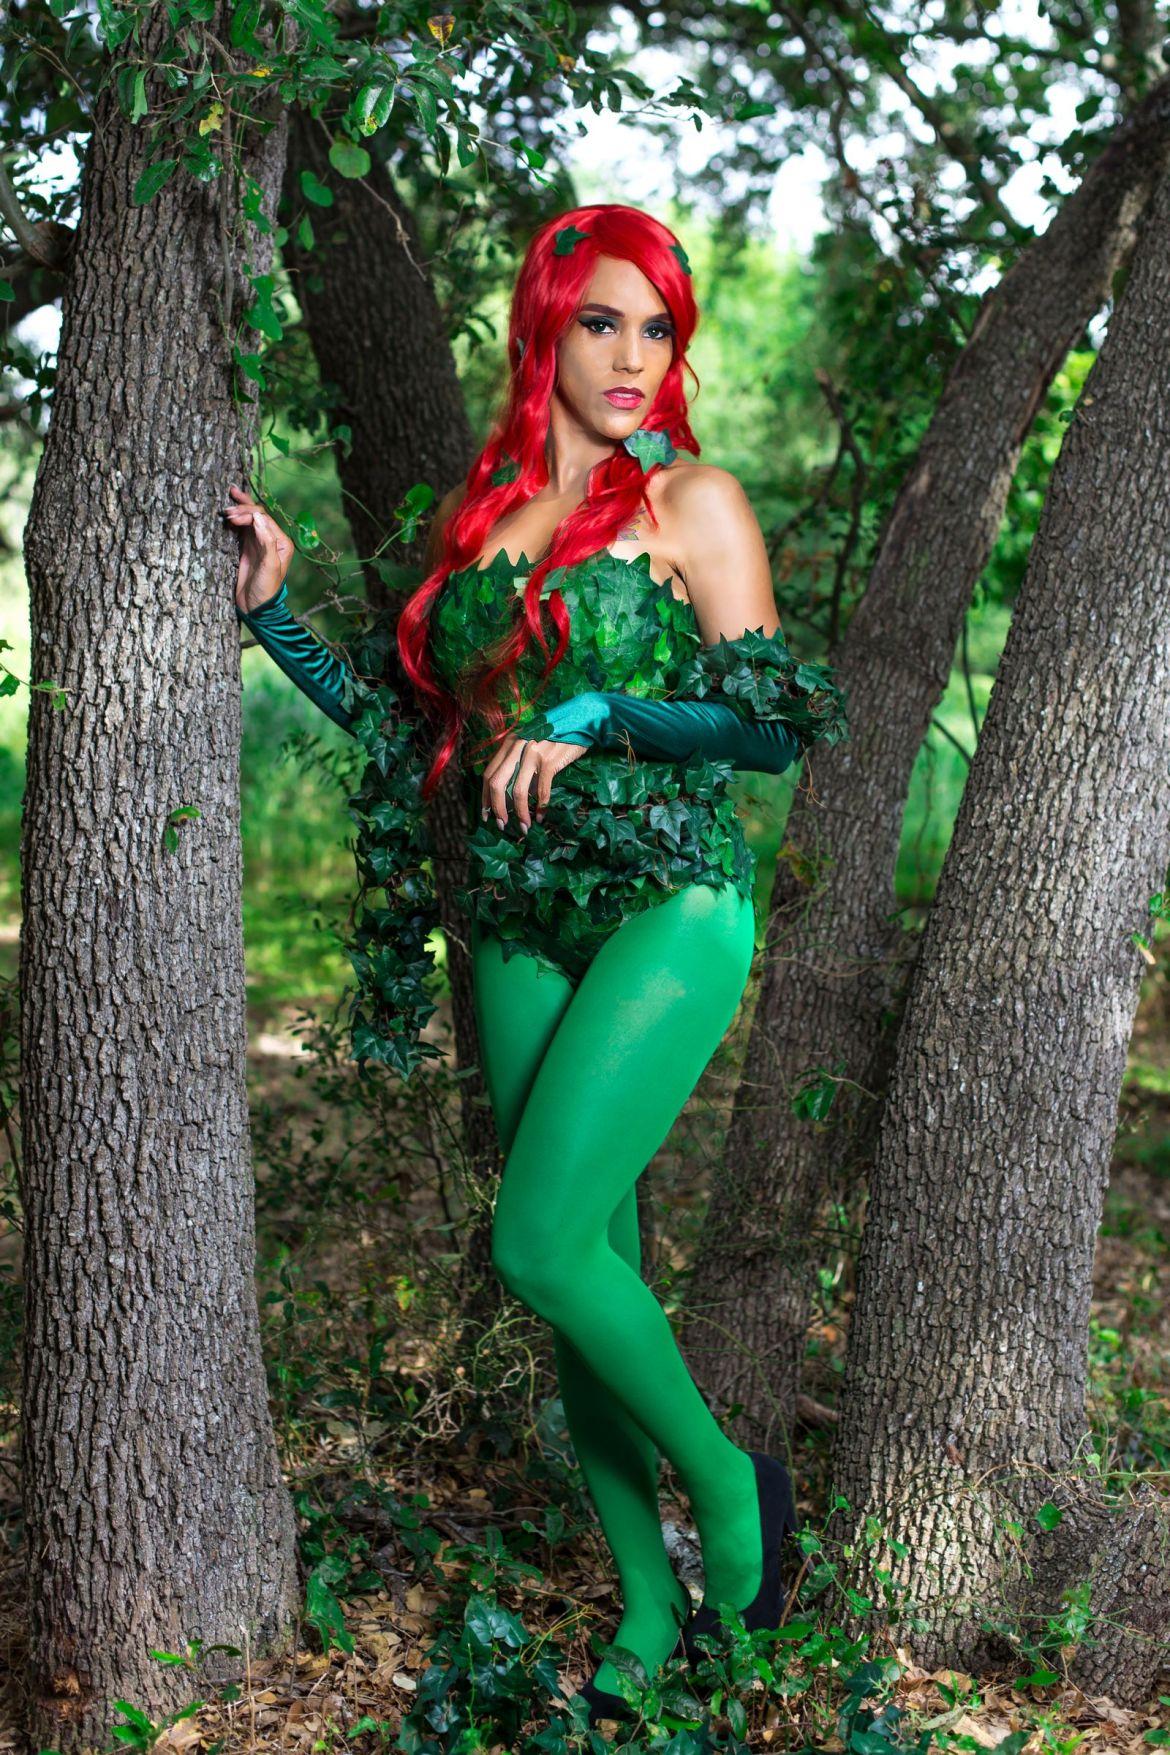 50+ Hot Pictures Of Poison Ivy – One Of The Most Beautiful Batman’s Villain 13